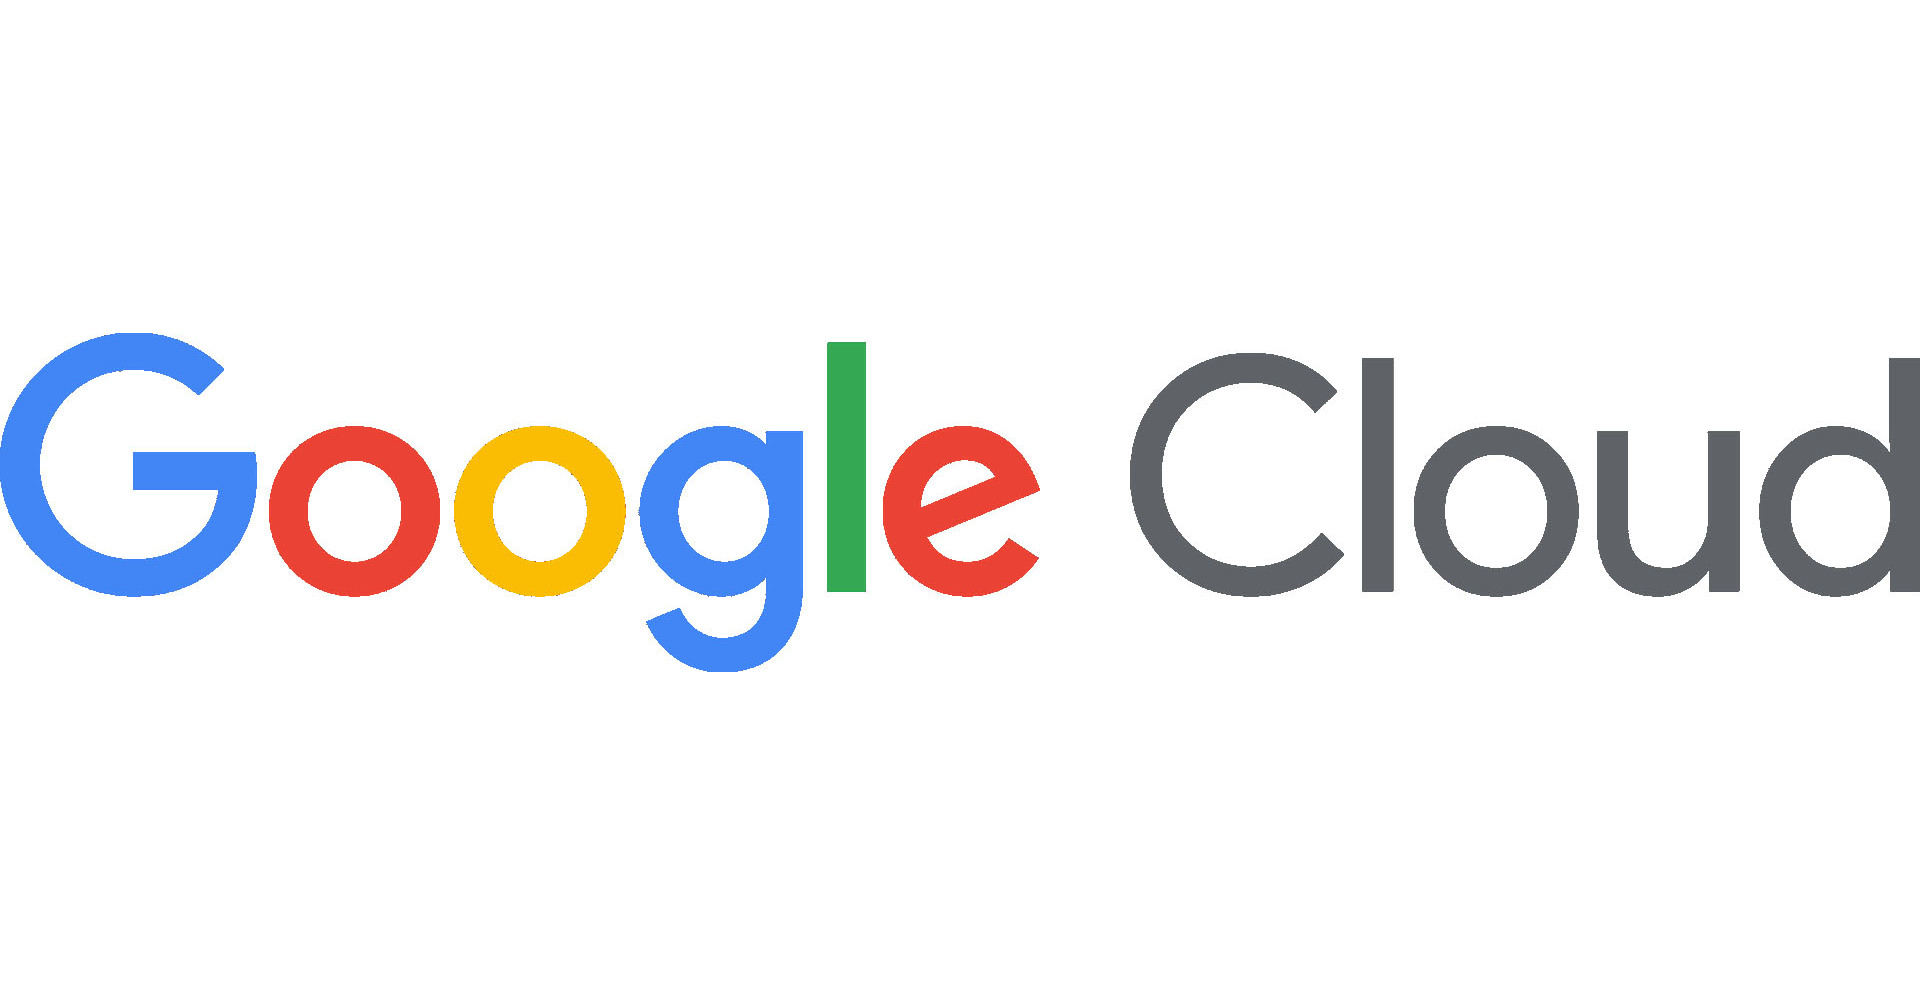 Google Cloud Launches New Solutions to Help Manufacturers Unify Their Data and Address Industry-Specific Use Cases